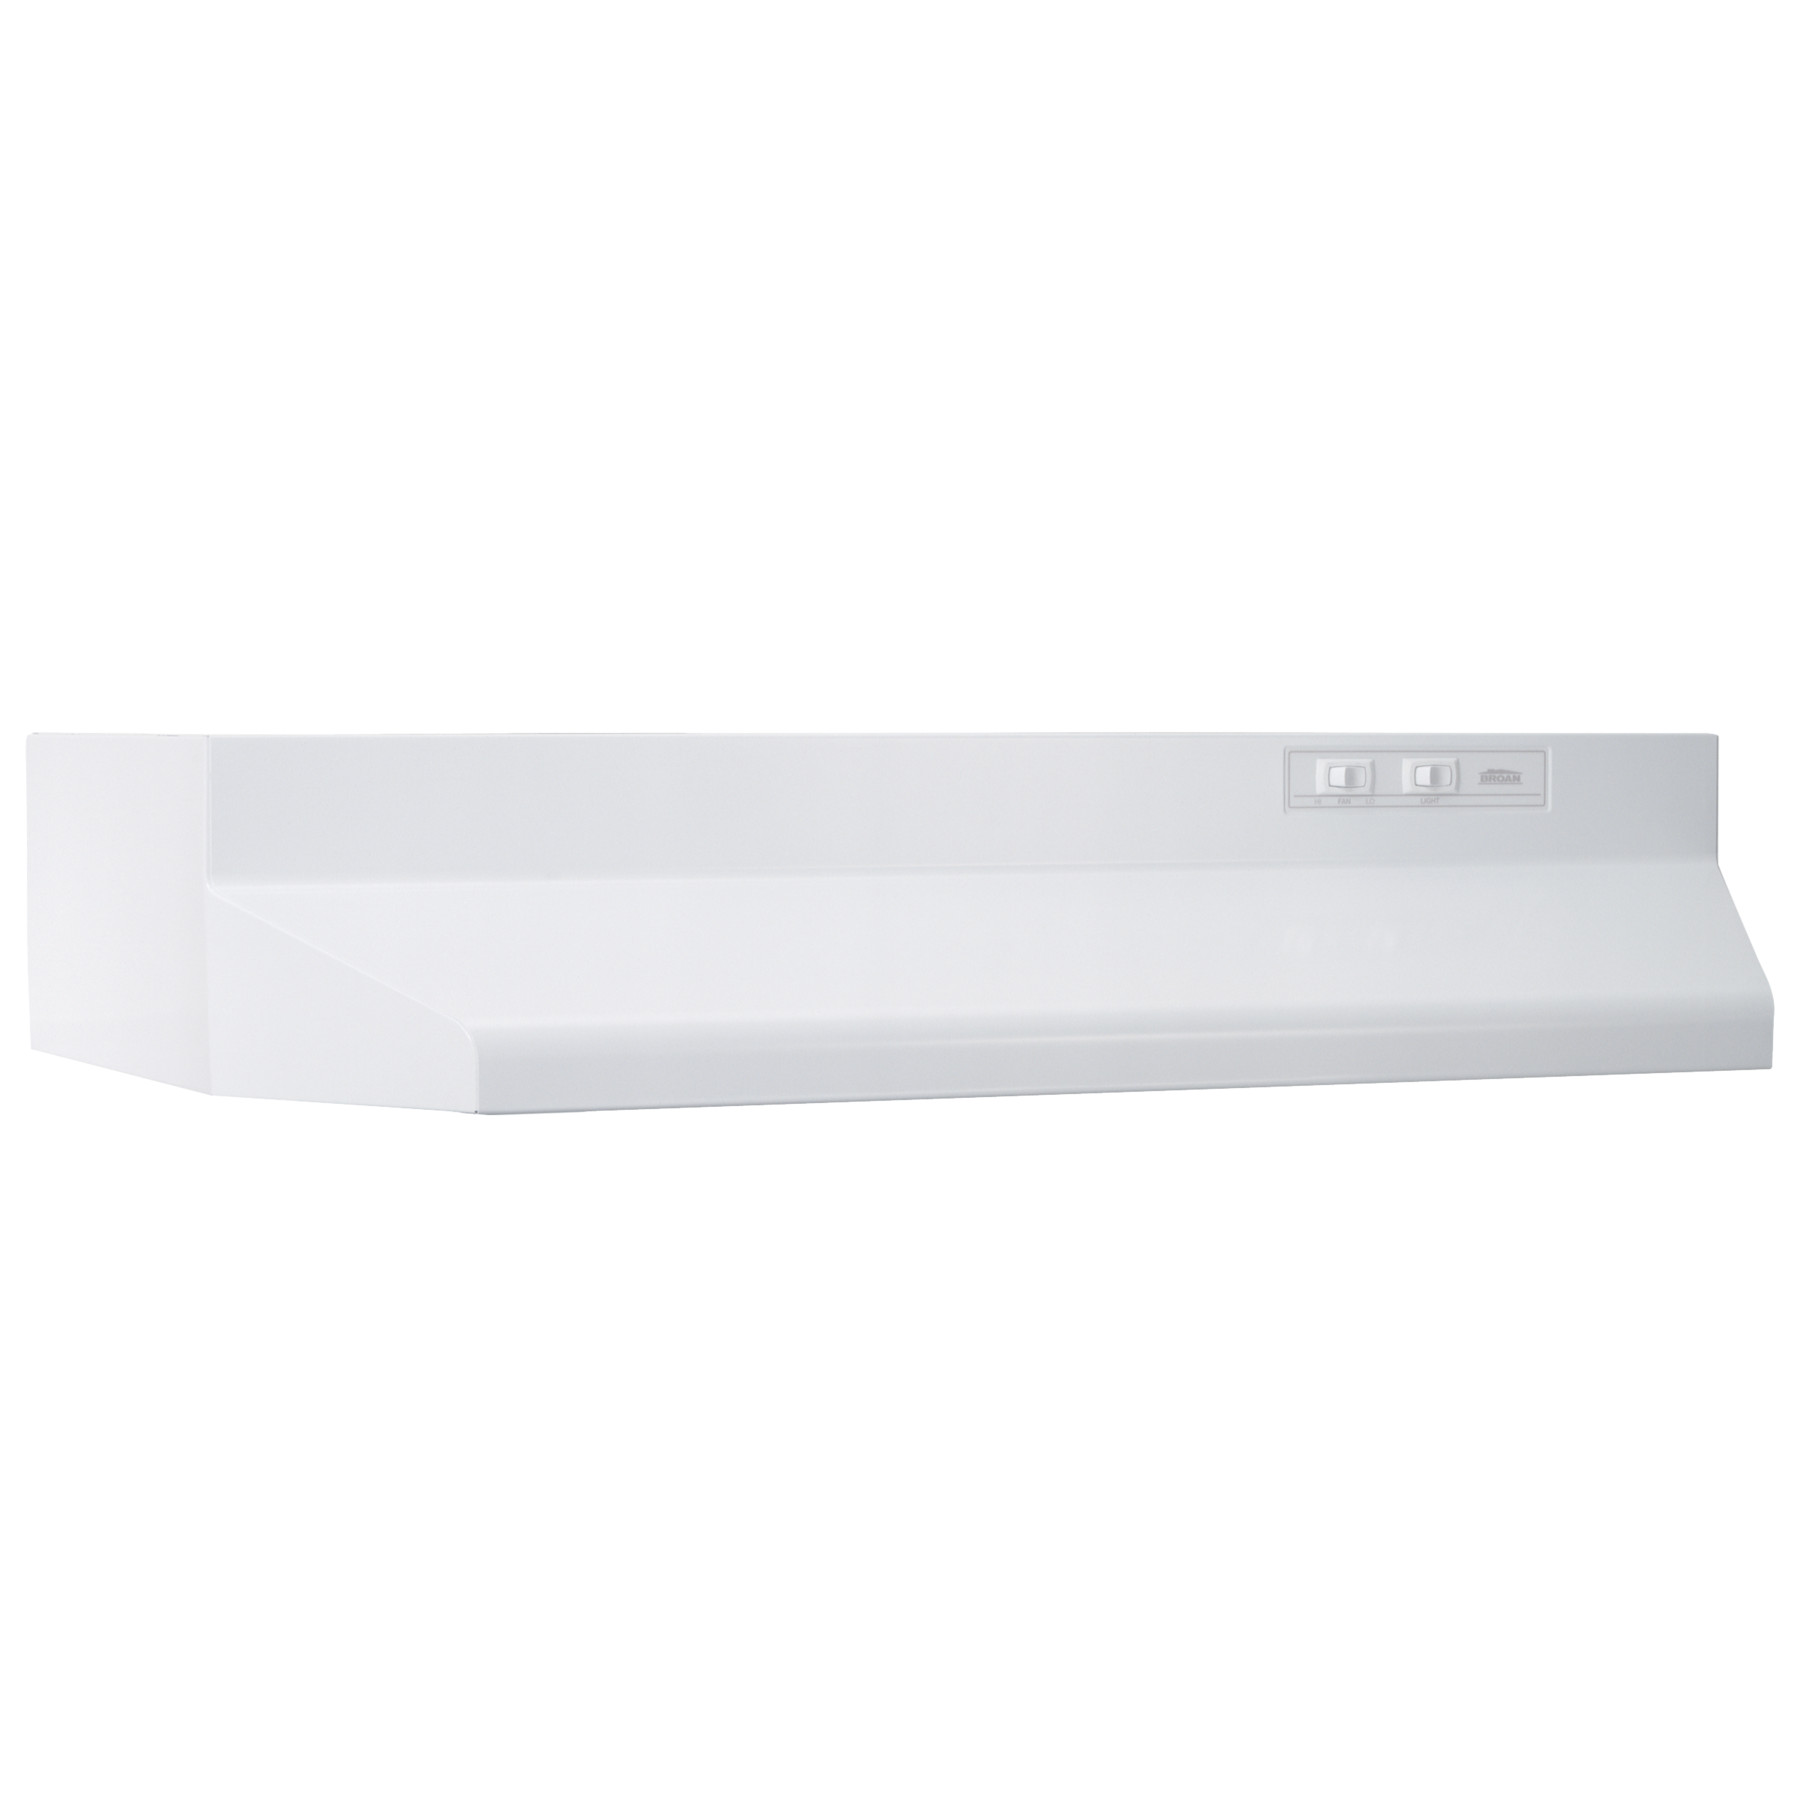 403001 Broan® 30-Inch Ducted Under-Cabinet Range Hood, 210 MAX Blower CFM,  White